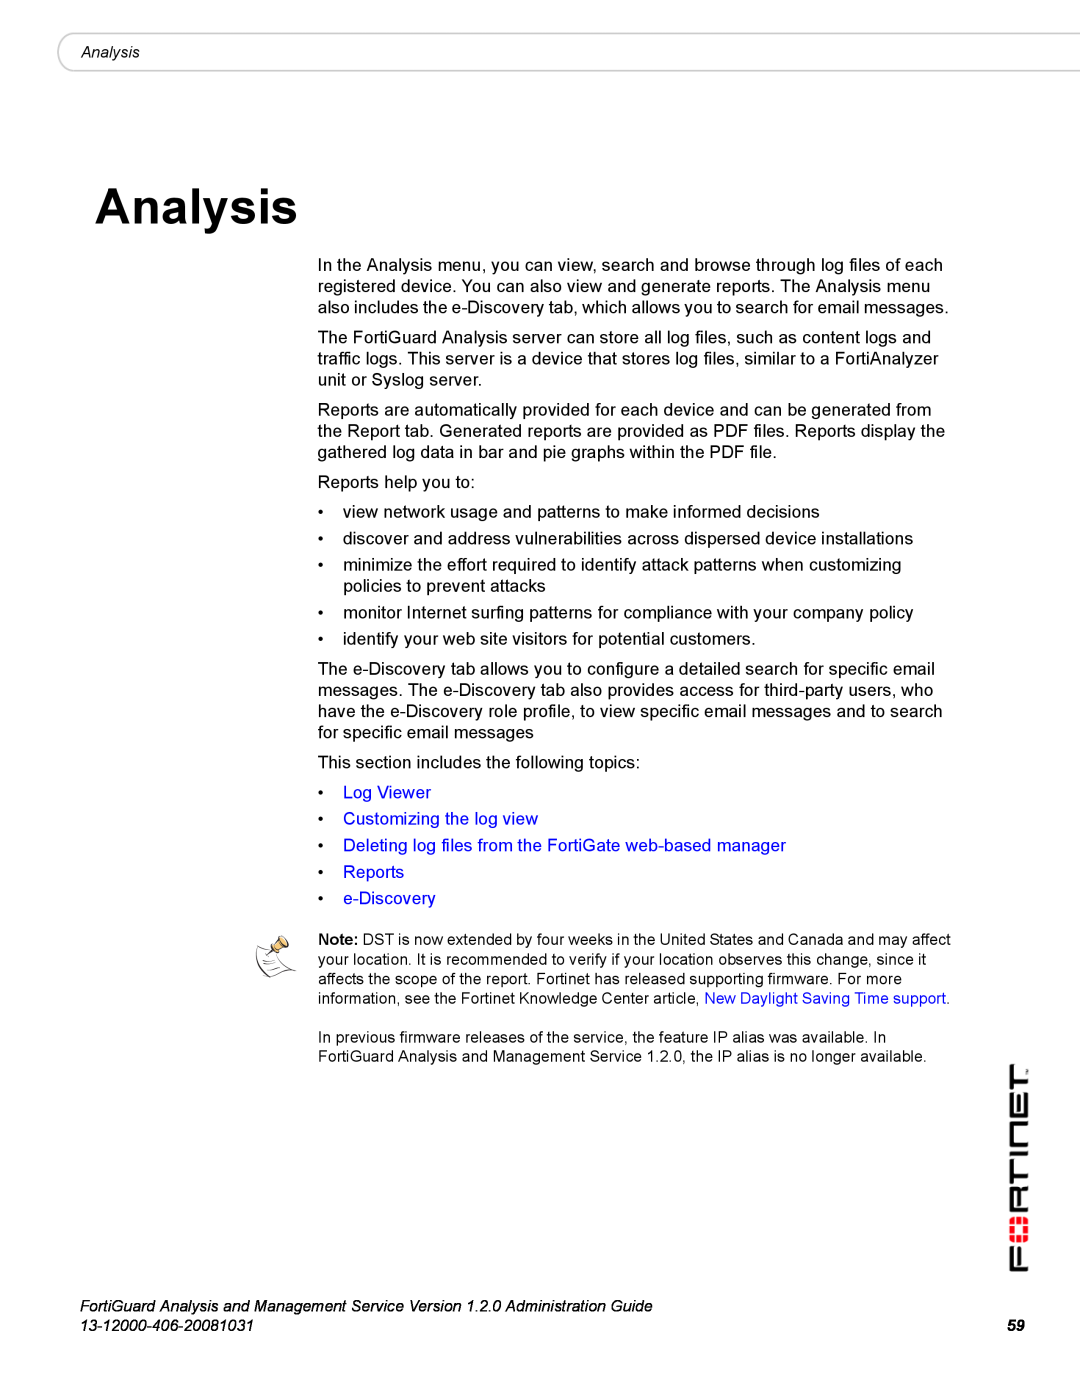 Fortinet 1.2.0 manual Analysis, Log Viewer Customizing the log view, e-Discovery 